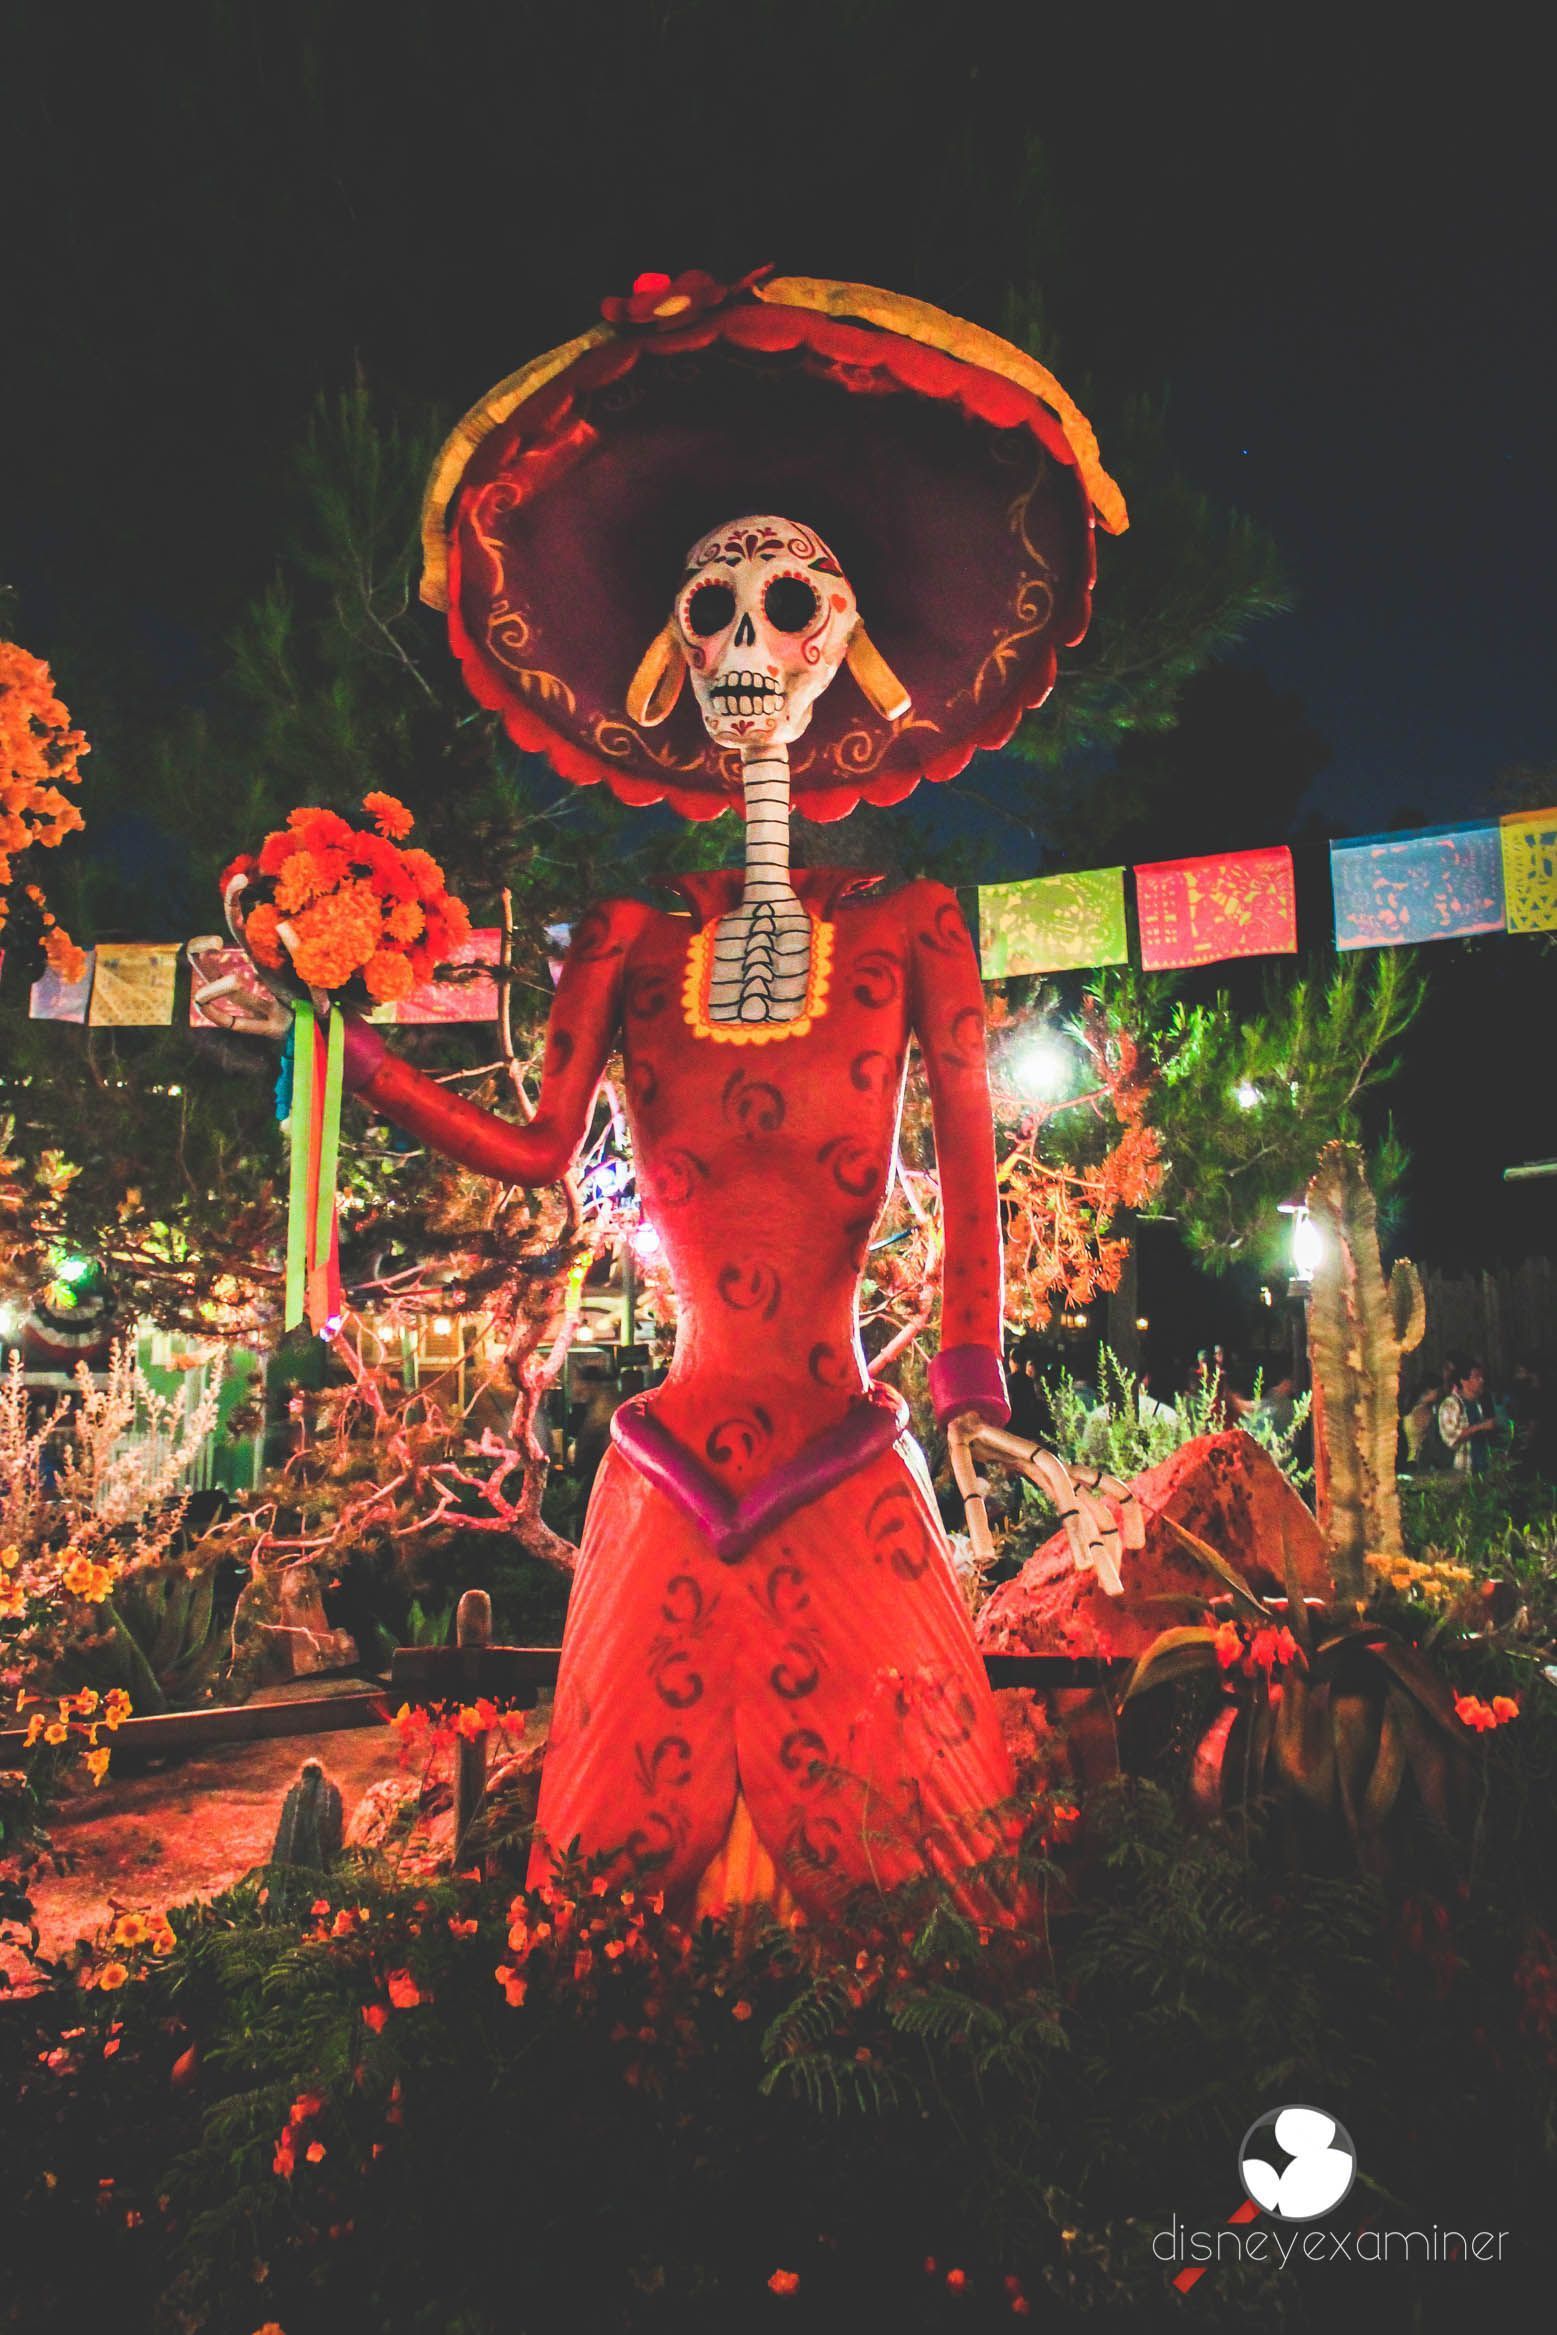 A skeleton dressed in red and holding flowers - Disneyland